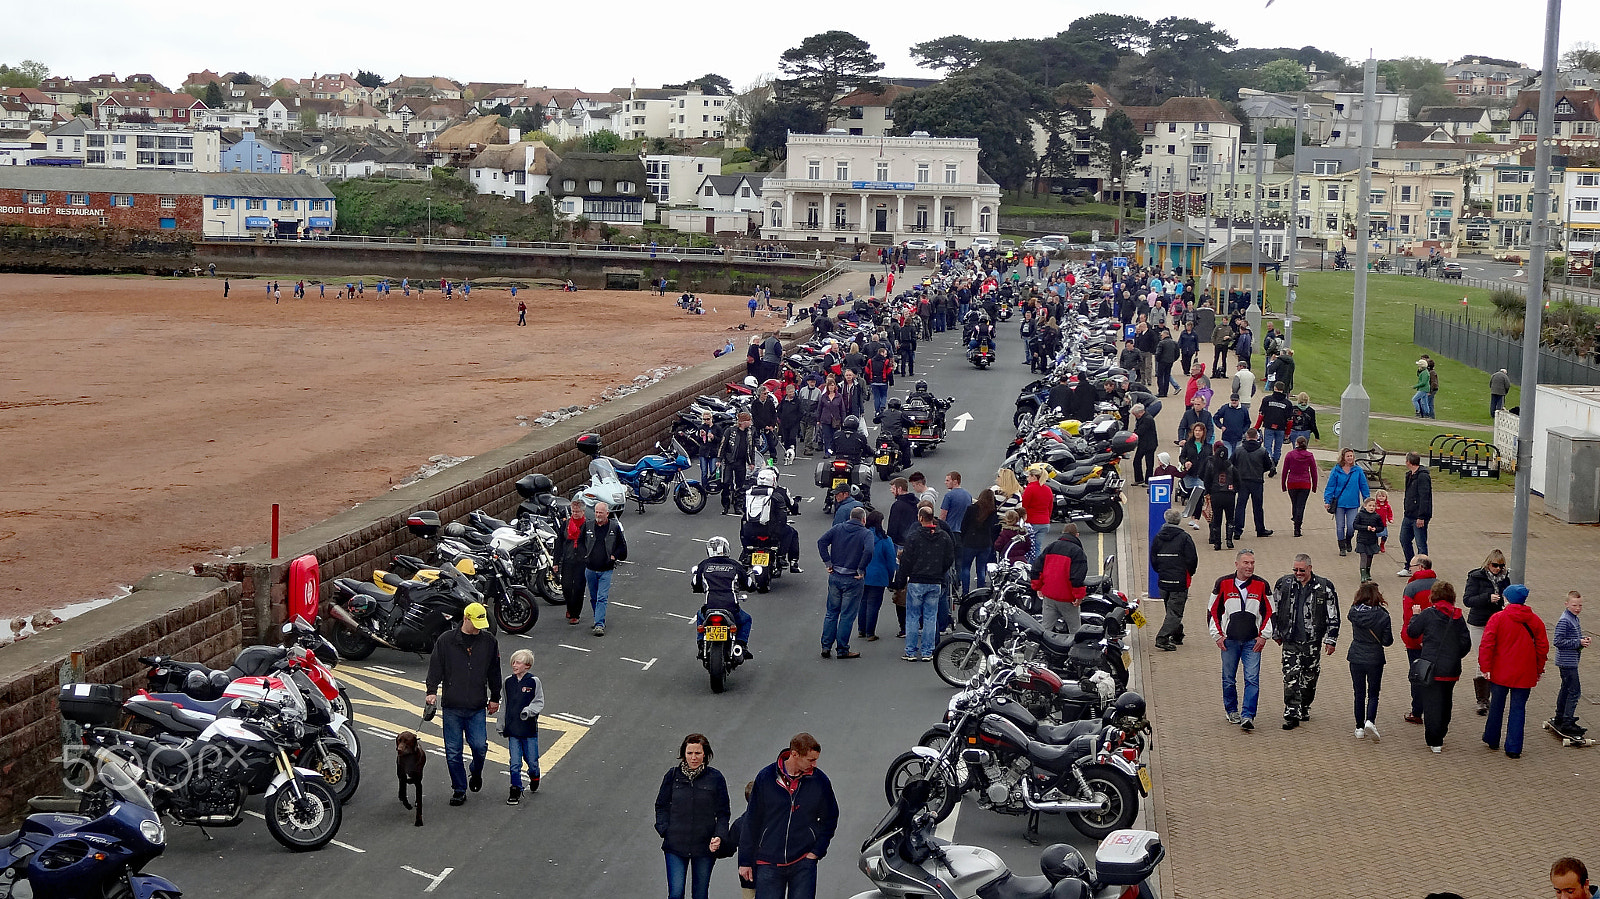 Sony DSC-WX100 sample photo. Bike rally on a seafront photography